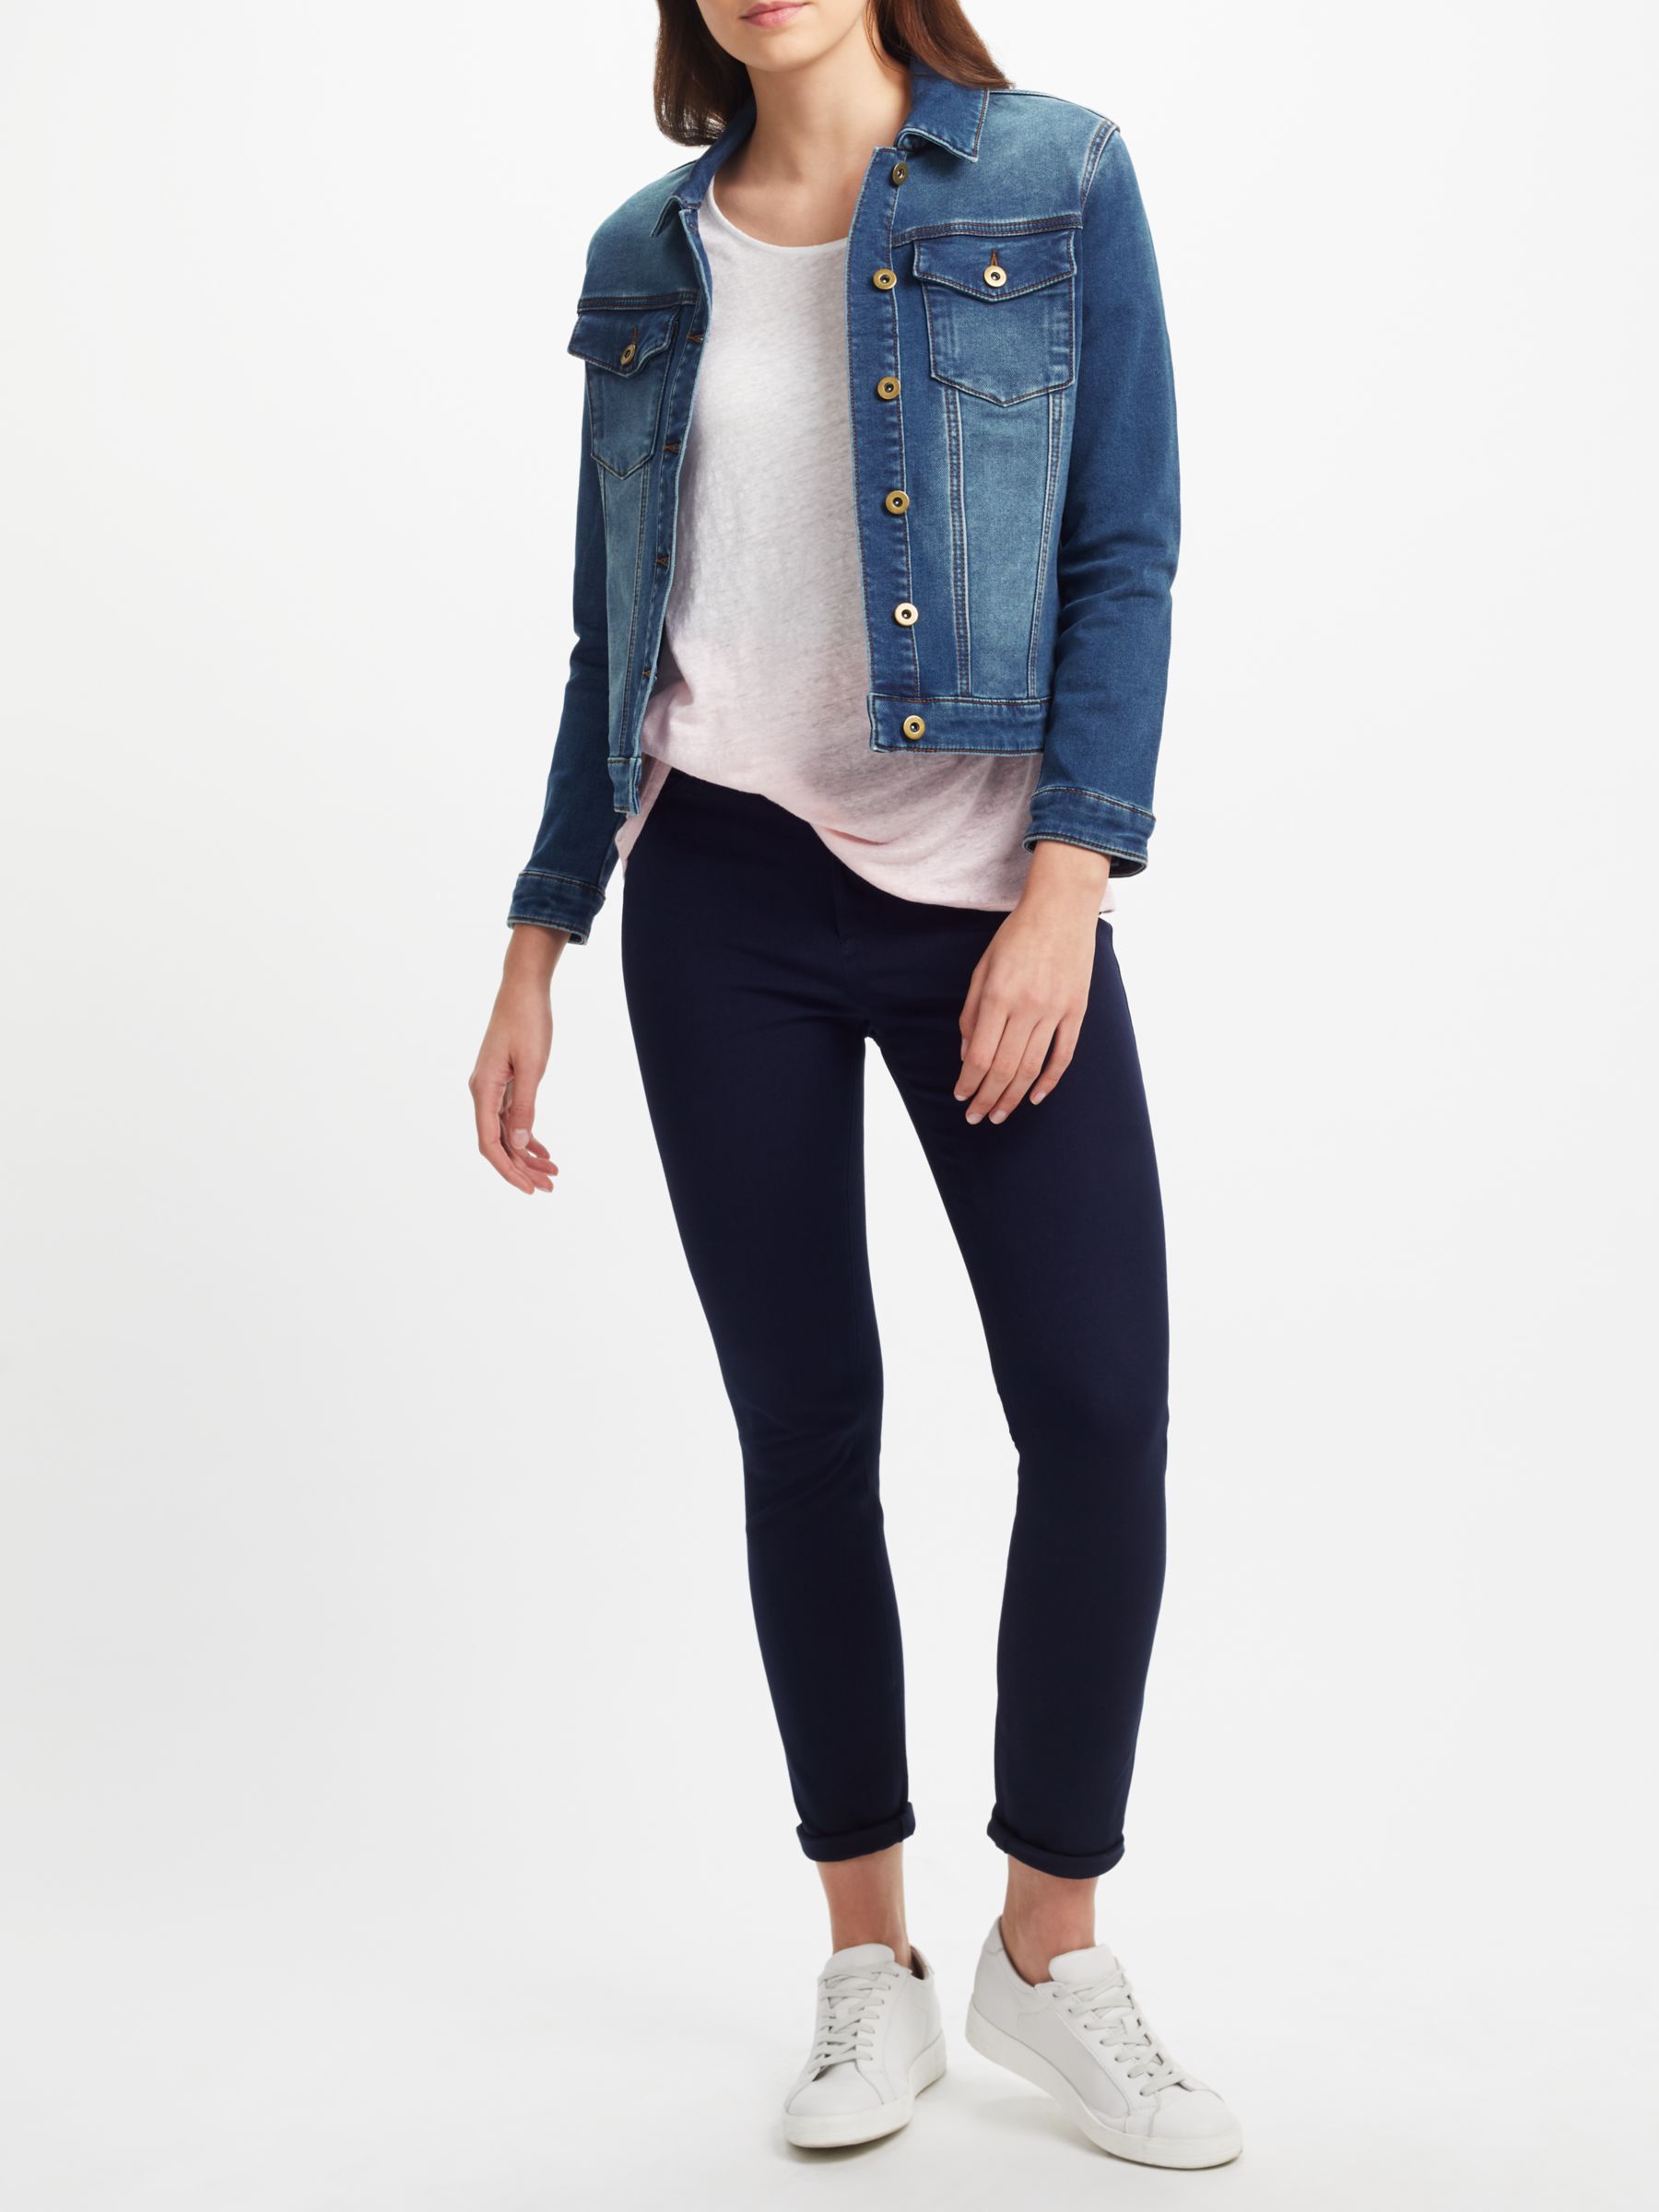 Collection WEEKEND by John Lewis Stretch Denim Jacket, Mid Wash